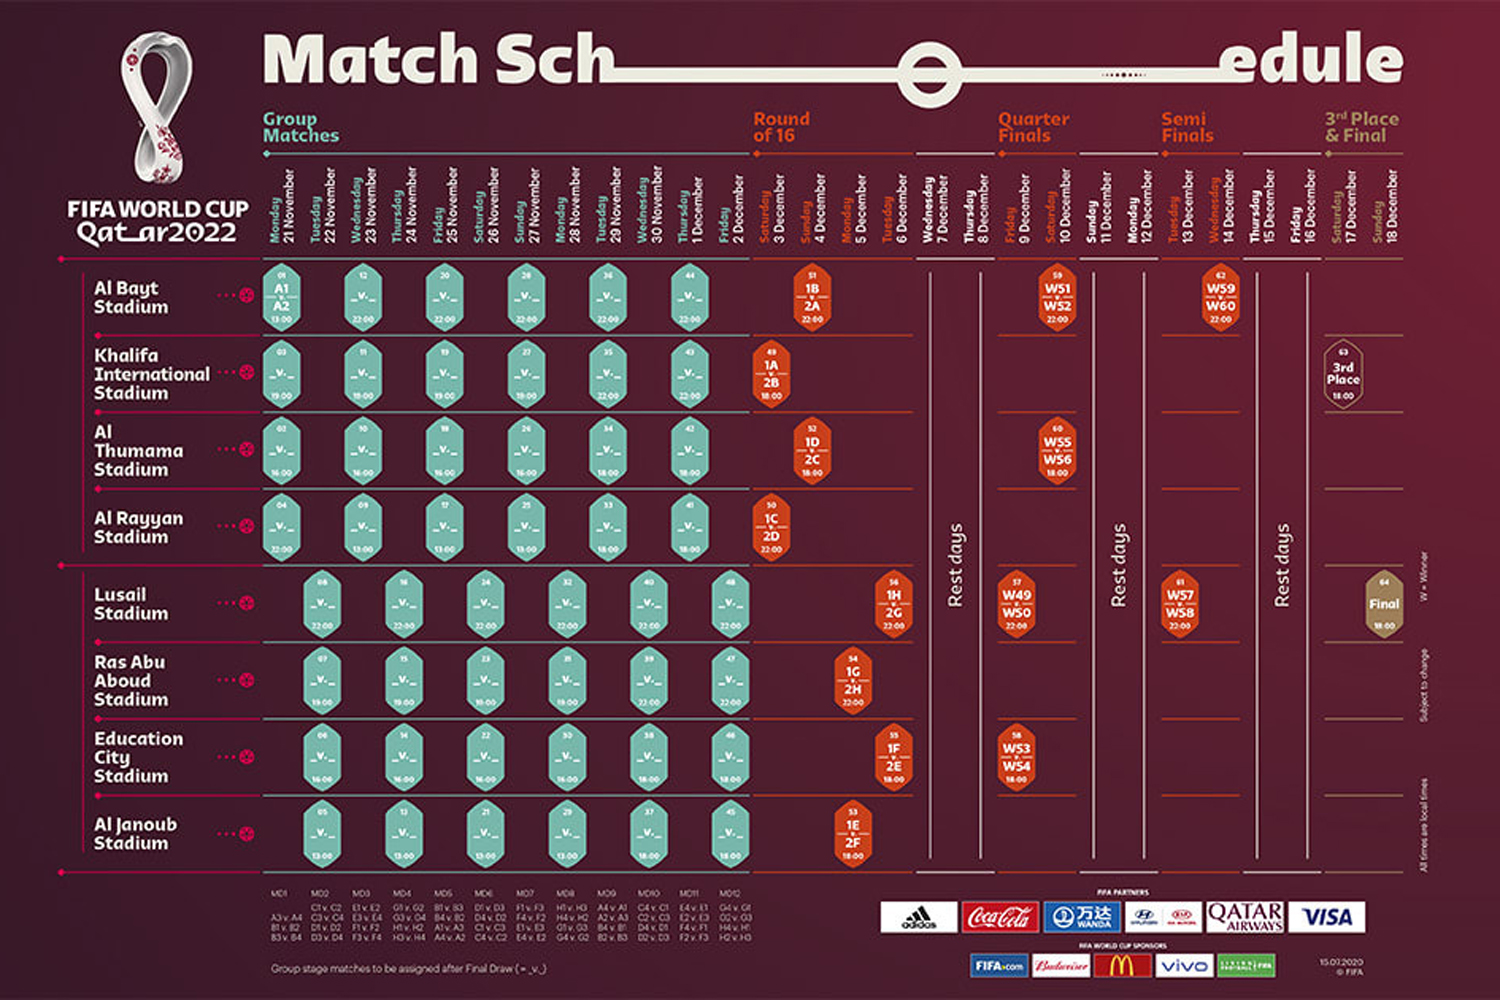 Match schedule confirmed for the FIFA World Cup Qatar 2022 | Sport